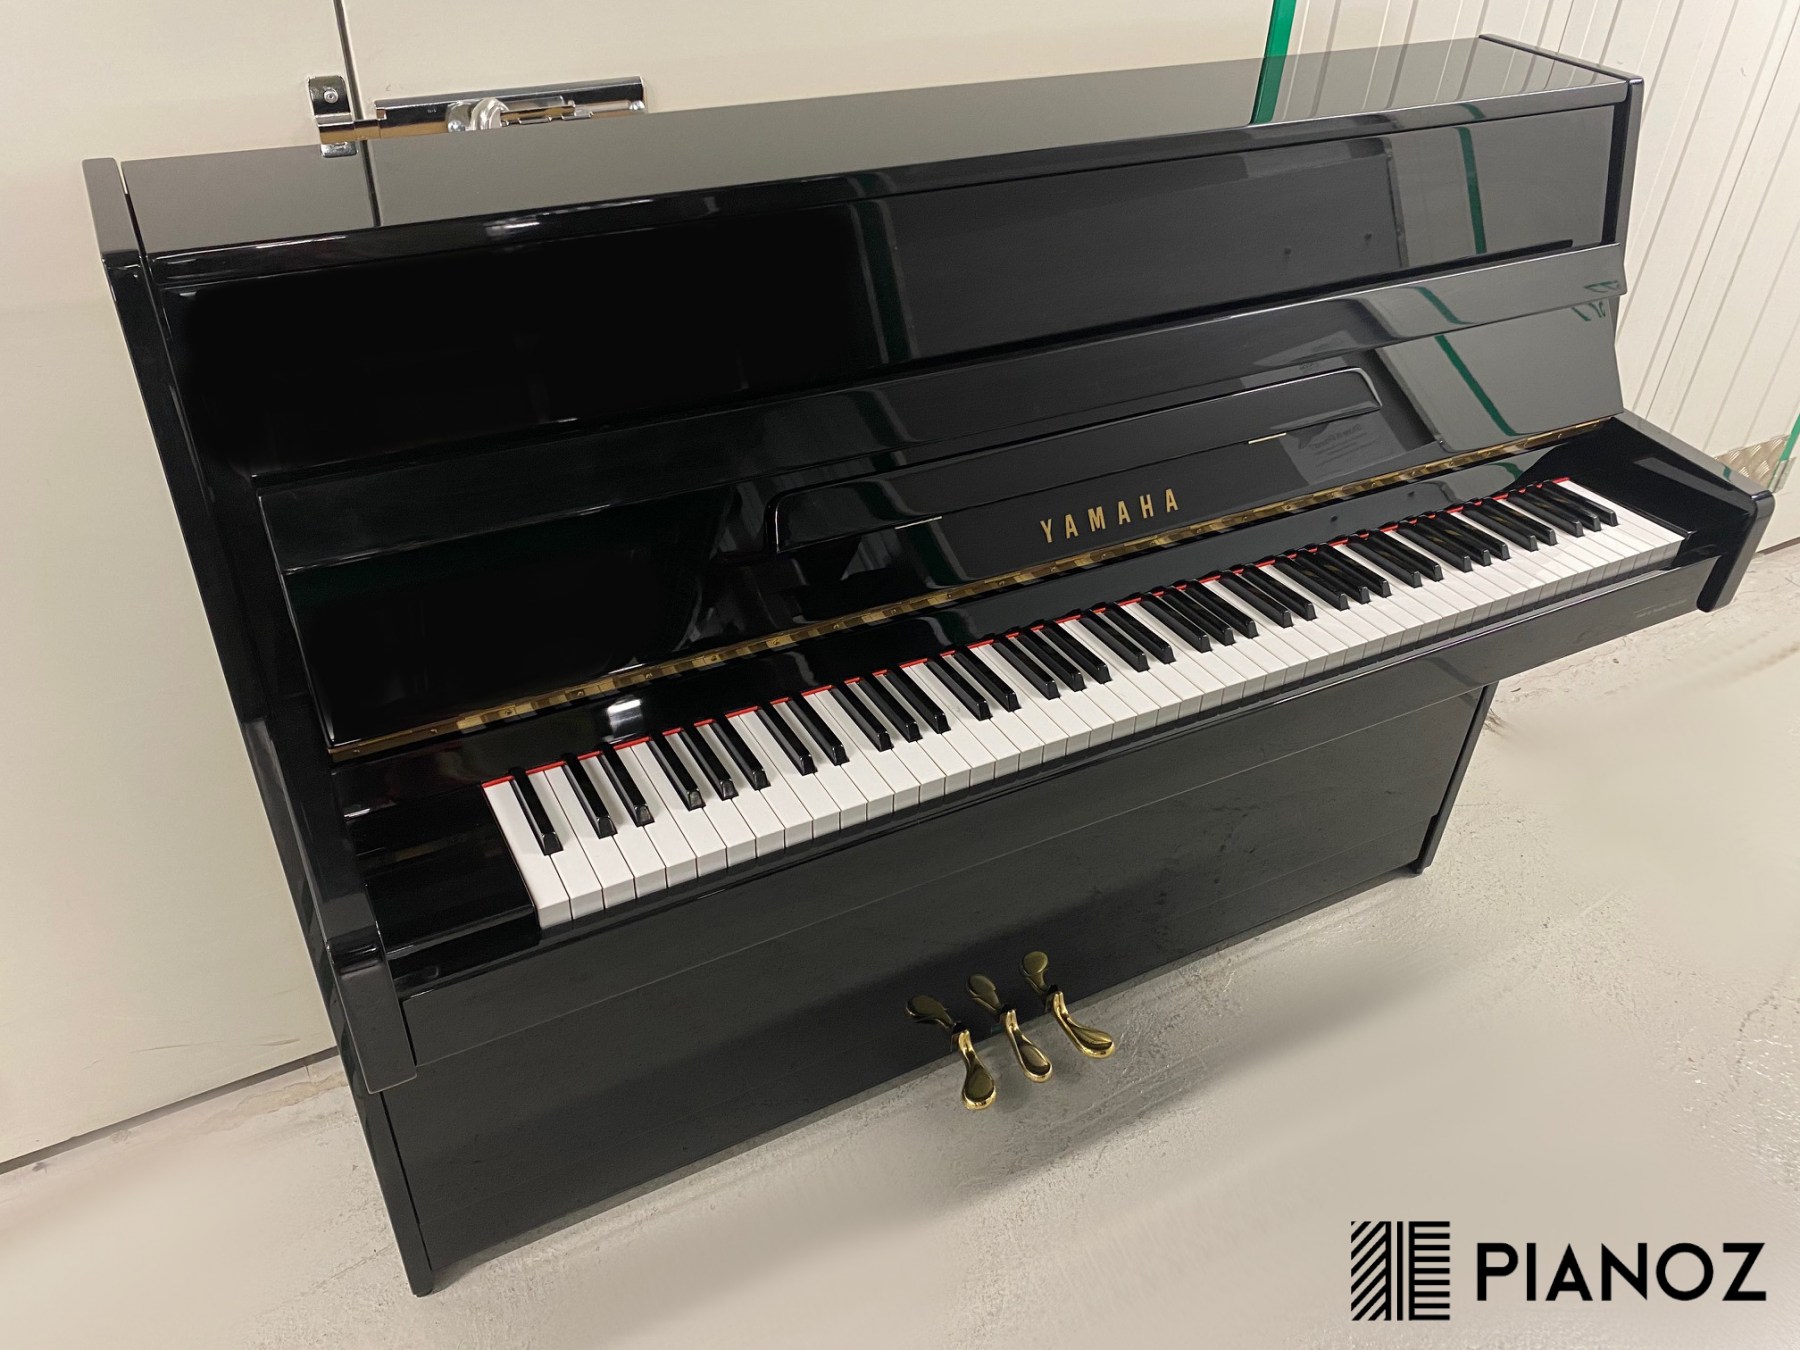 Yamaha C110A Upright Piano piano for sale in UK